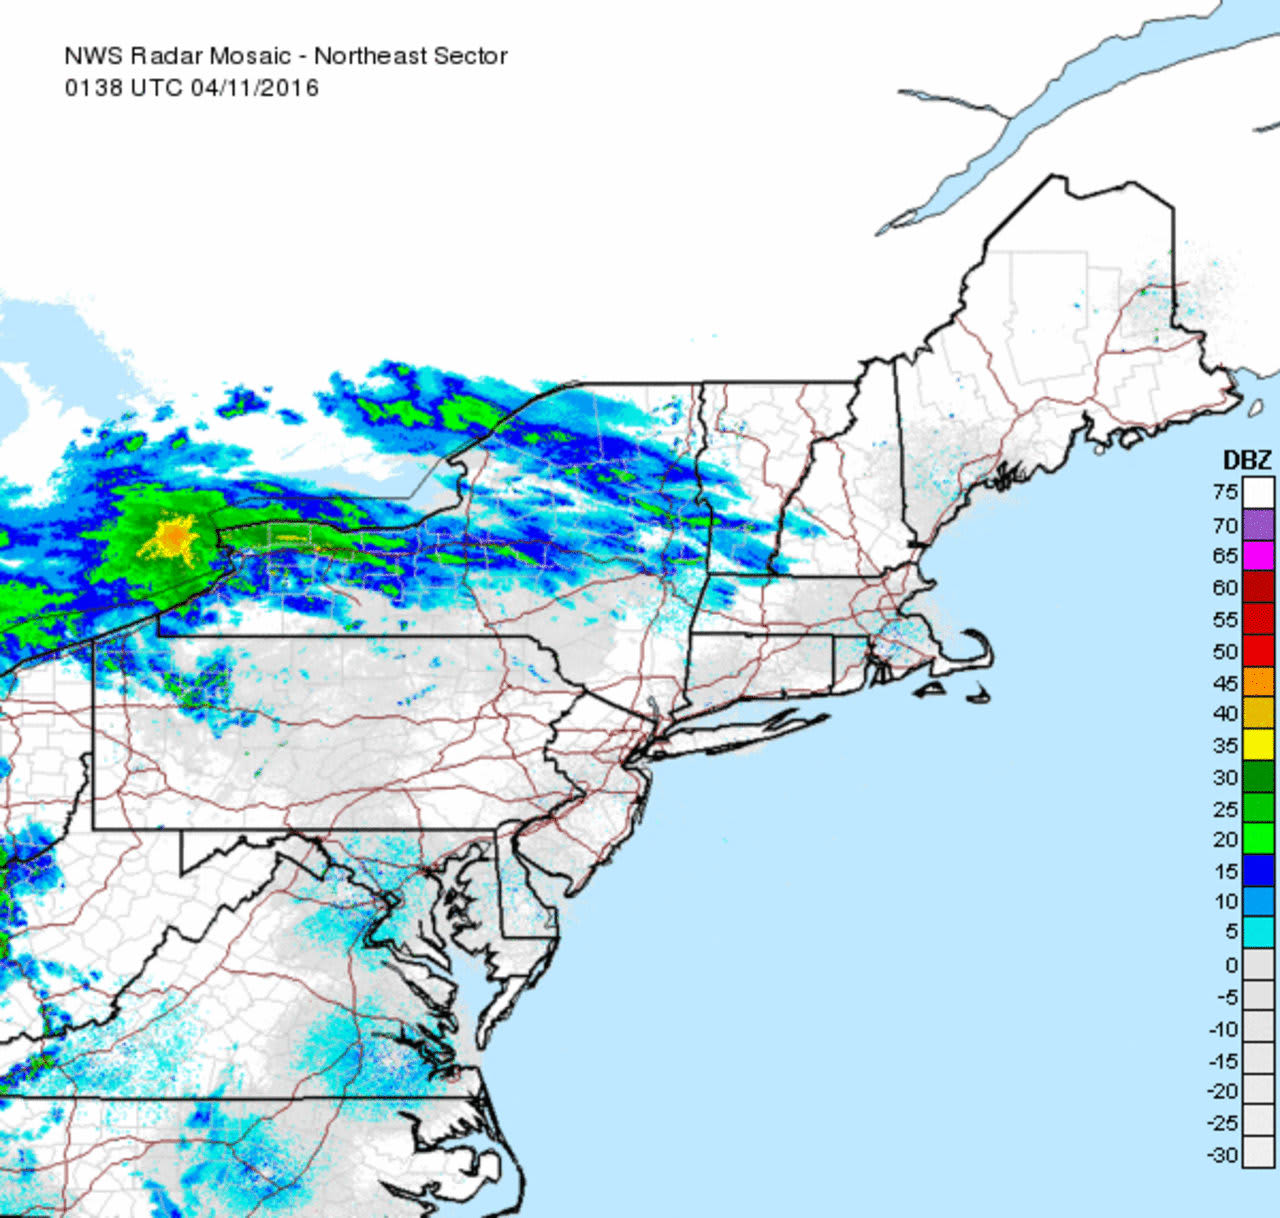 A storm system is set to strike the Hudson Valley Region on Monday and Tuesday.